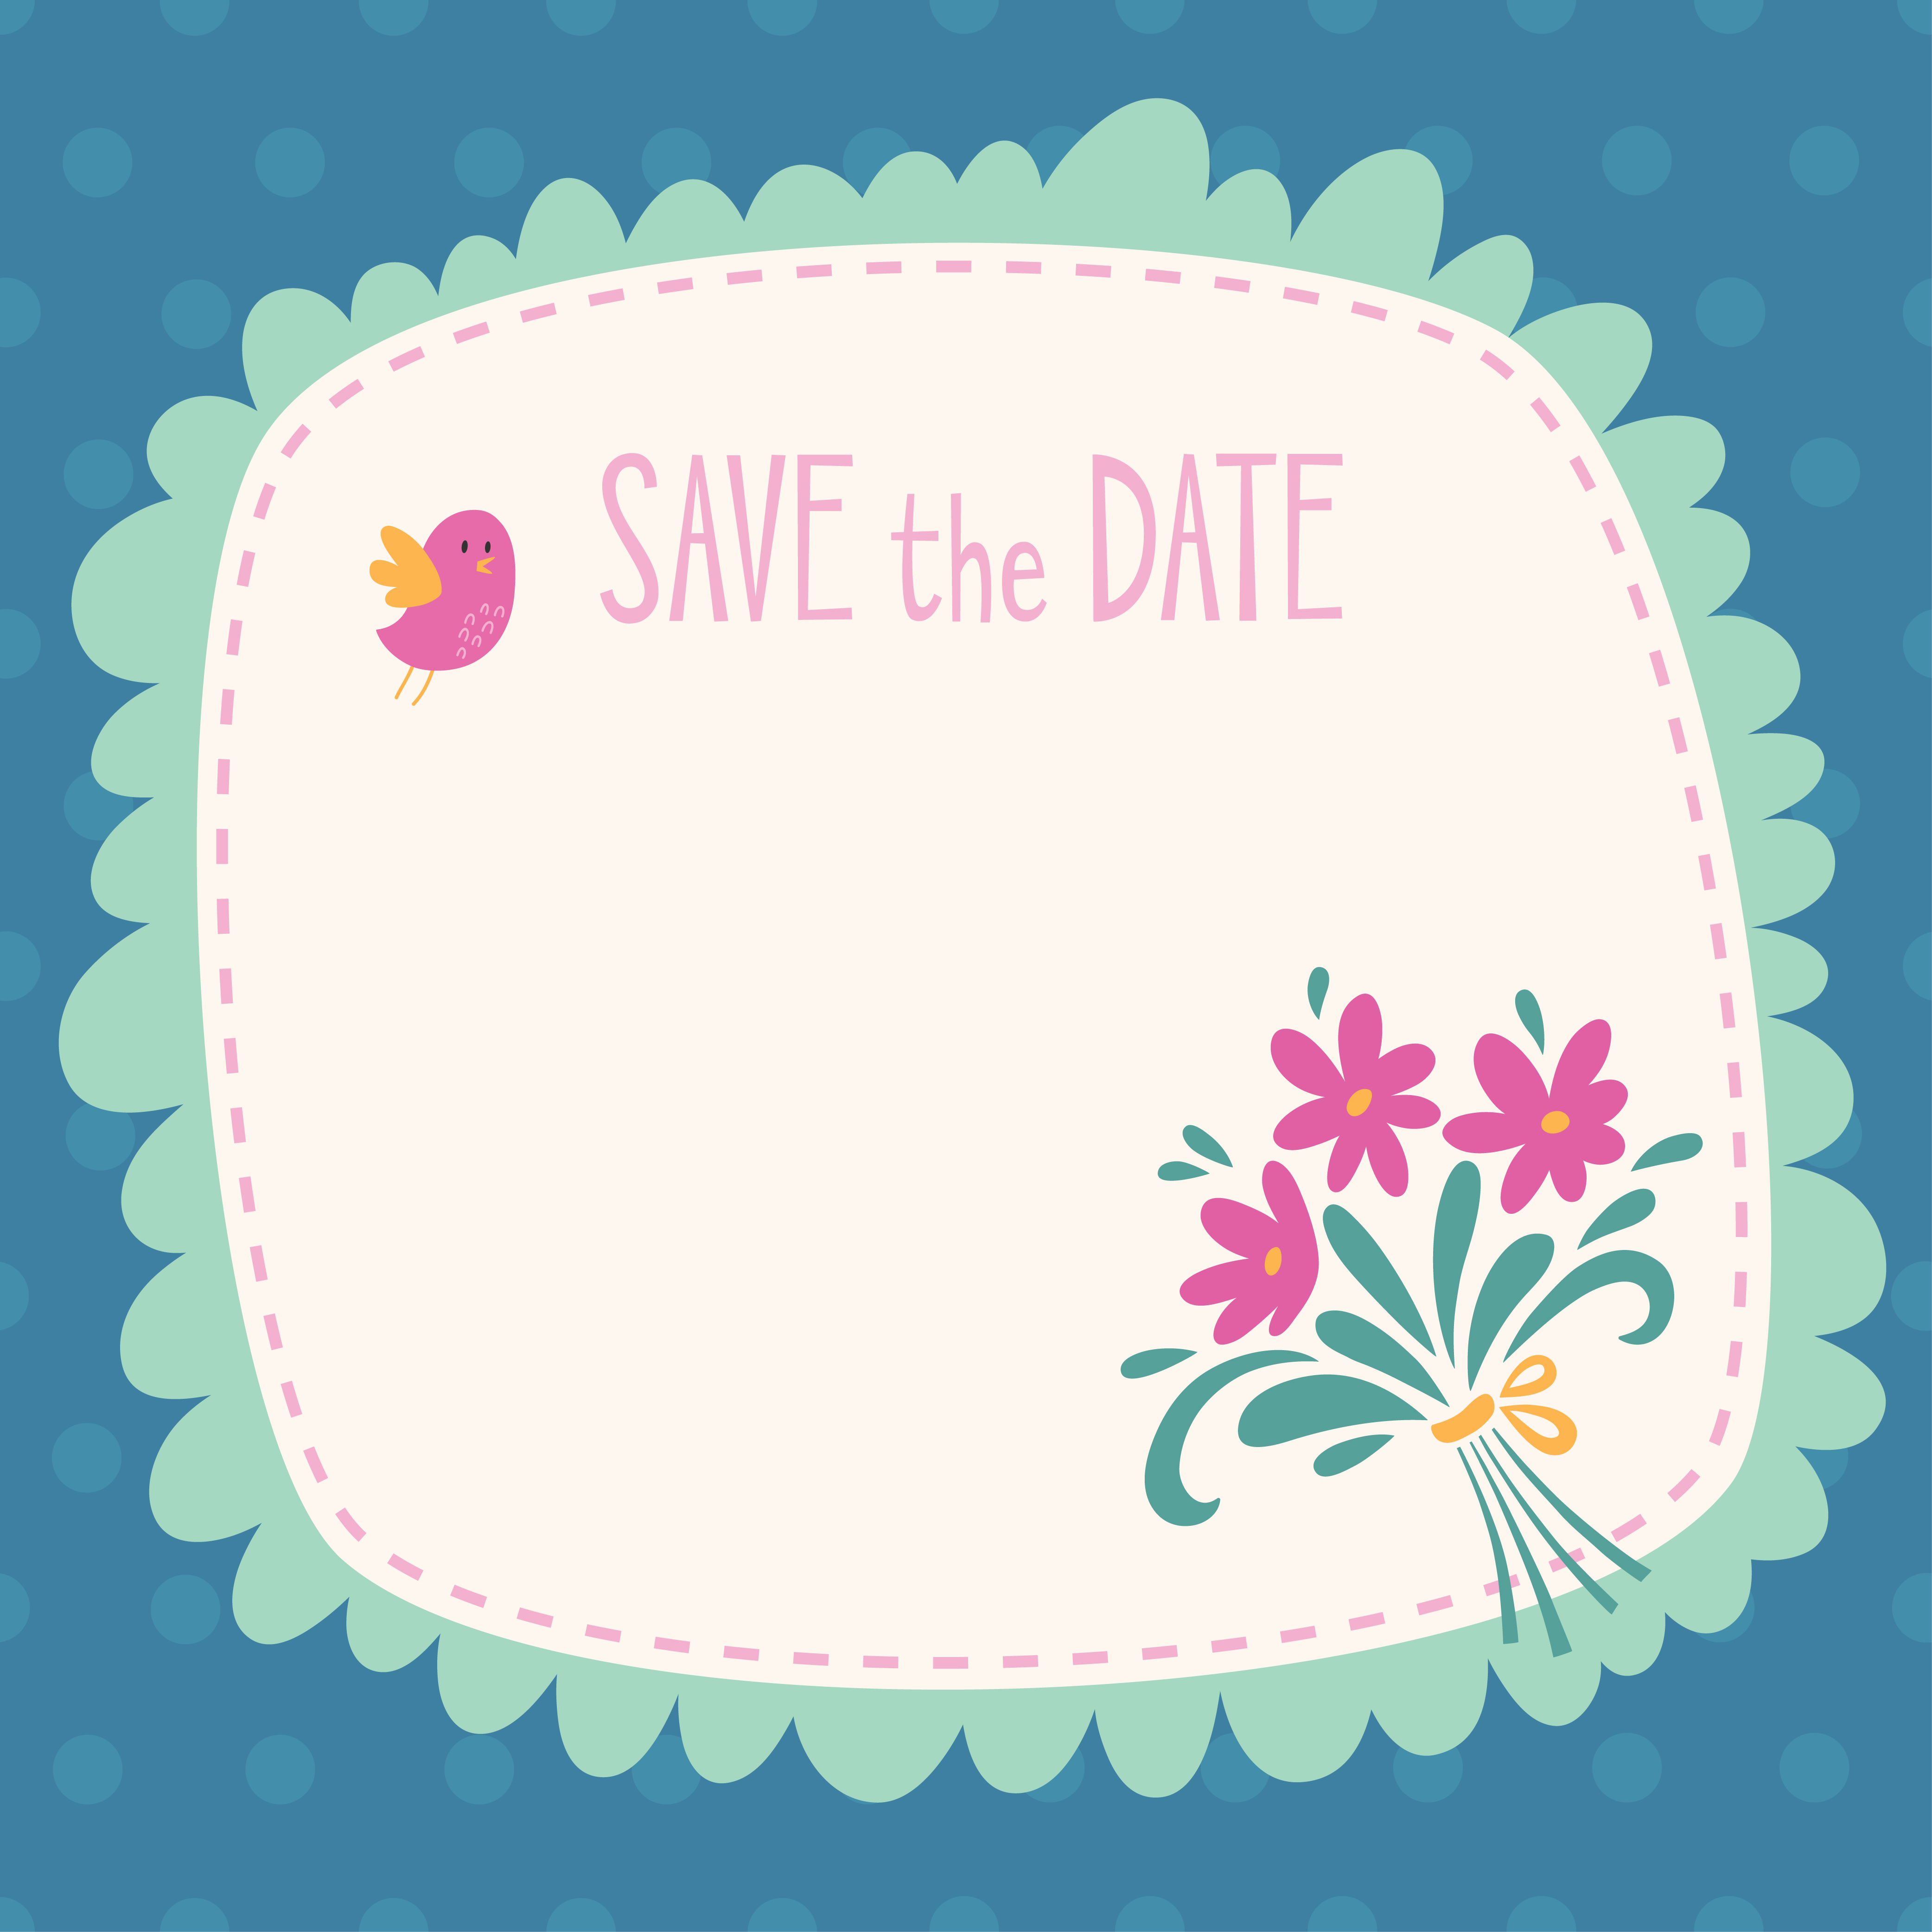 Save the date vector card Photoshop brush